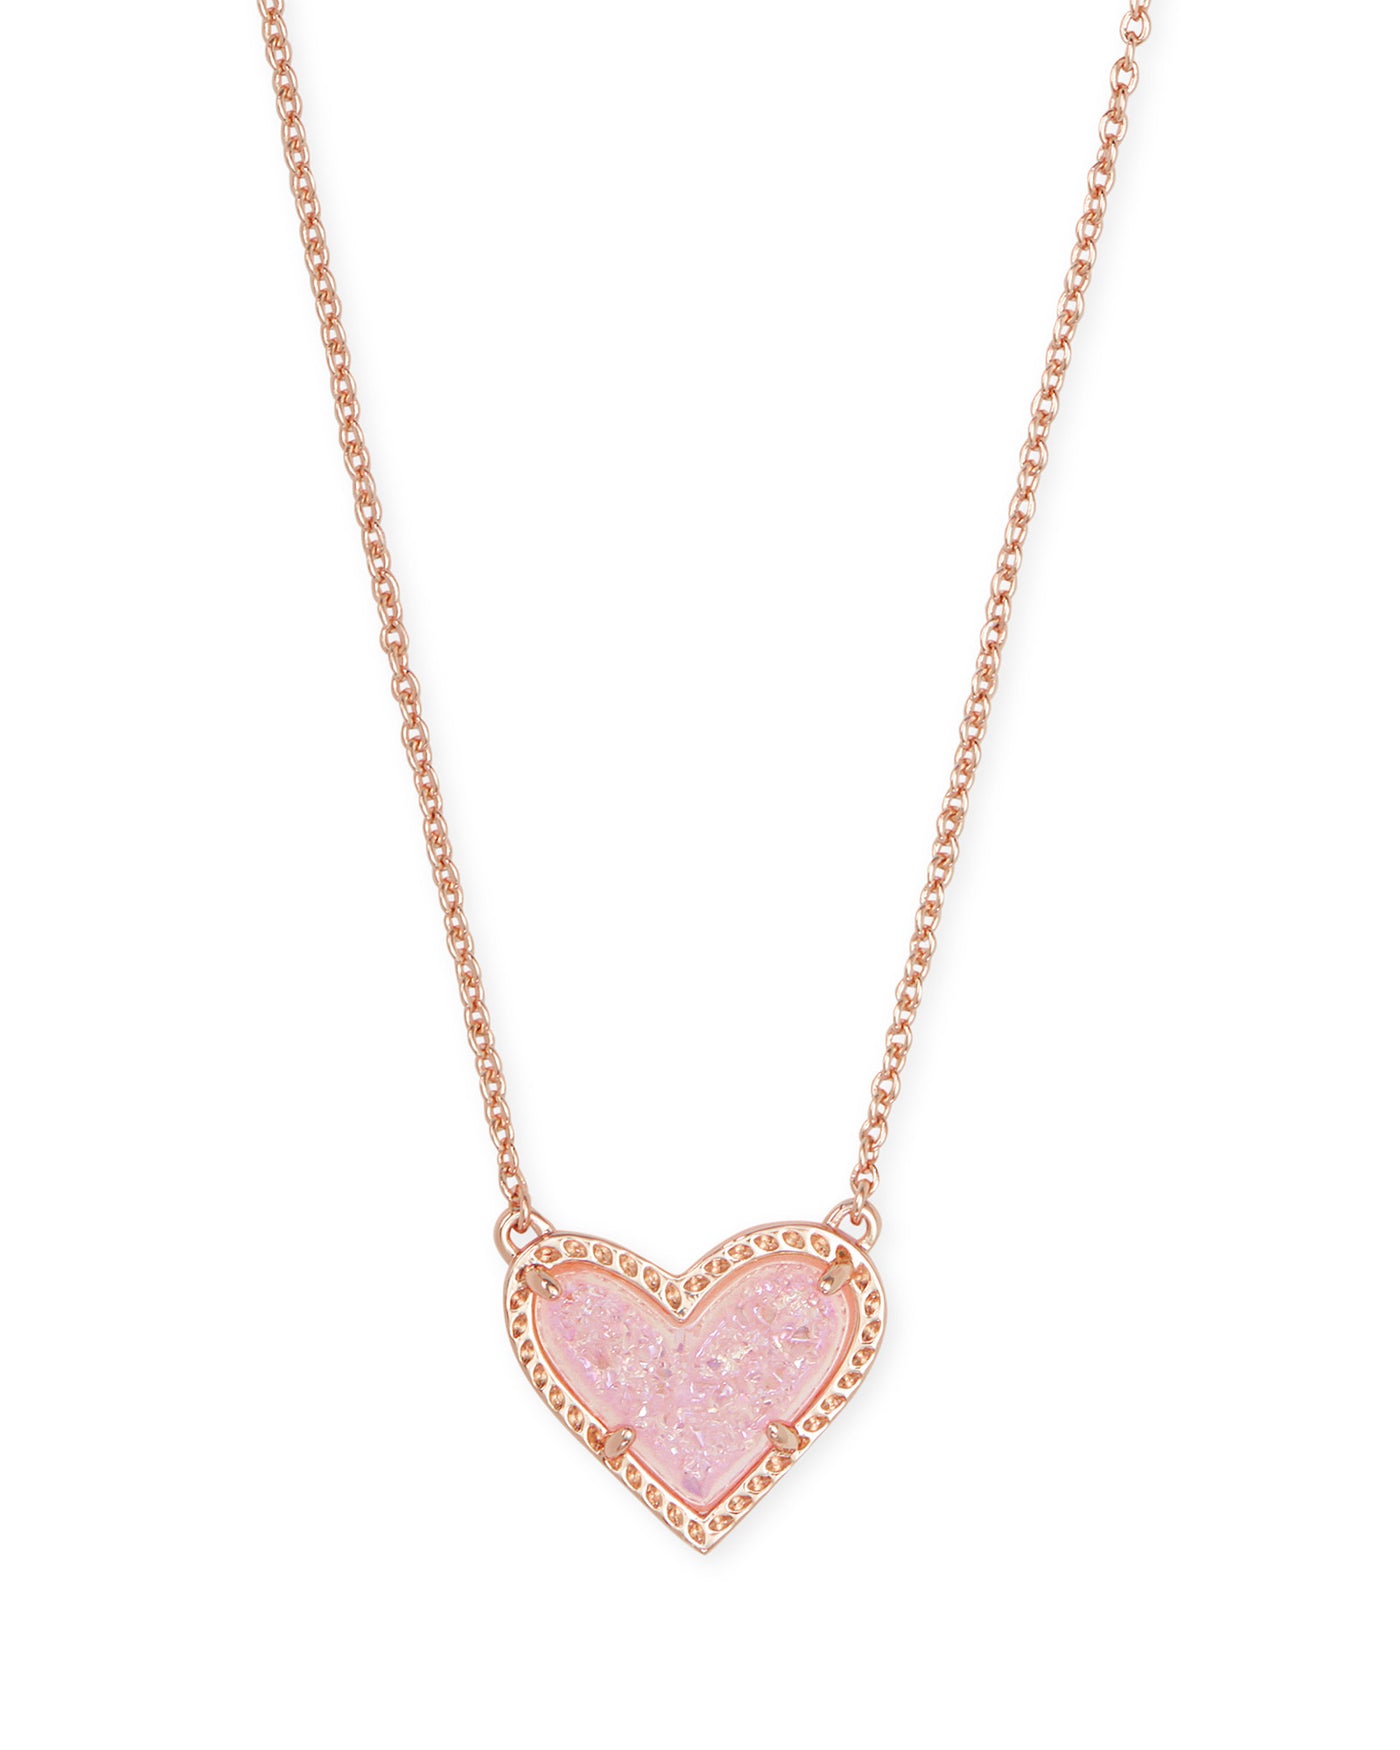 Ari Heart Pendant Necklace Rose Gold Pink Drusy on white background, front view.